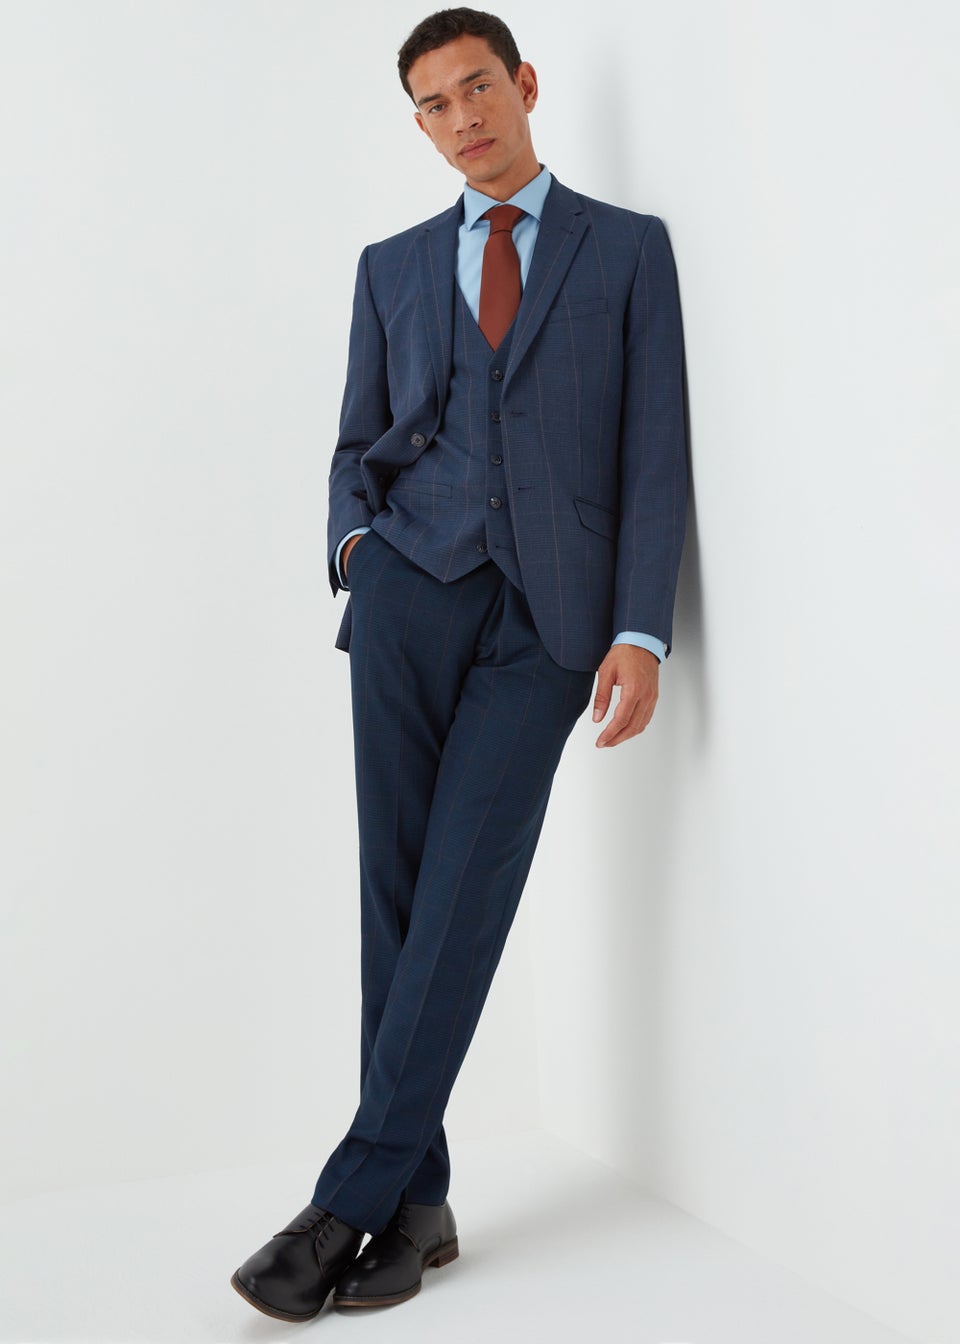 Taylor & Wright Westminster Navy Slim Fit Suit Jacket